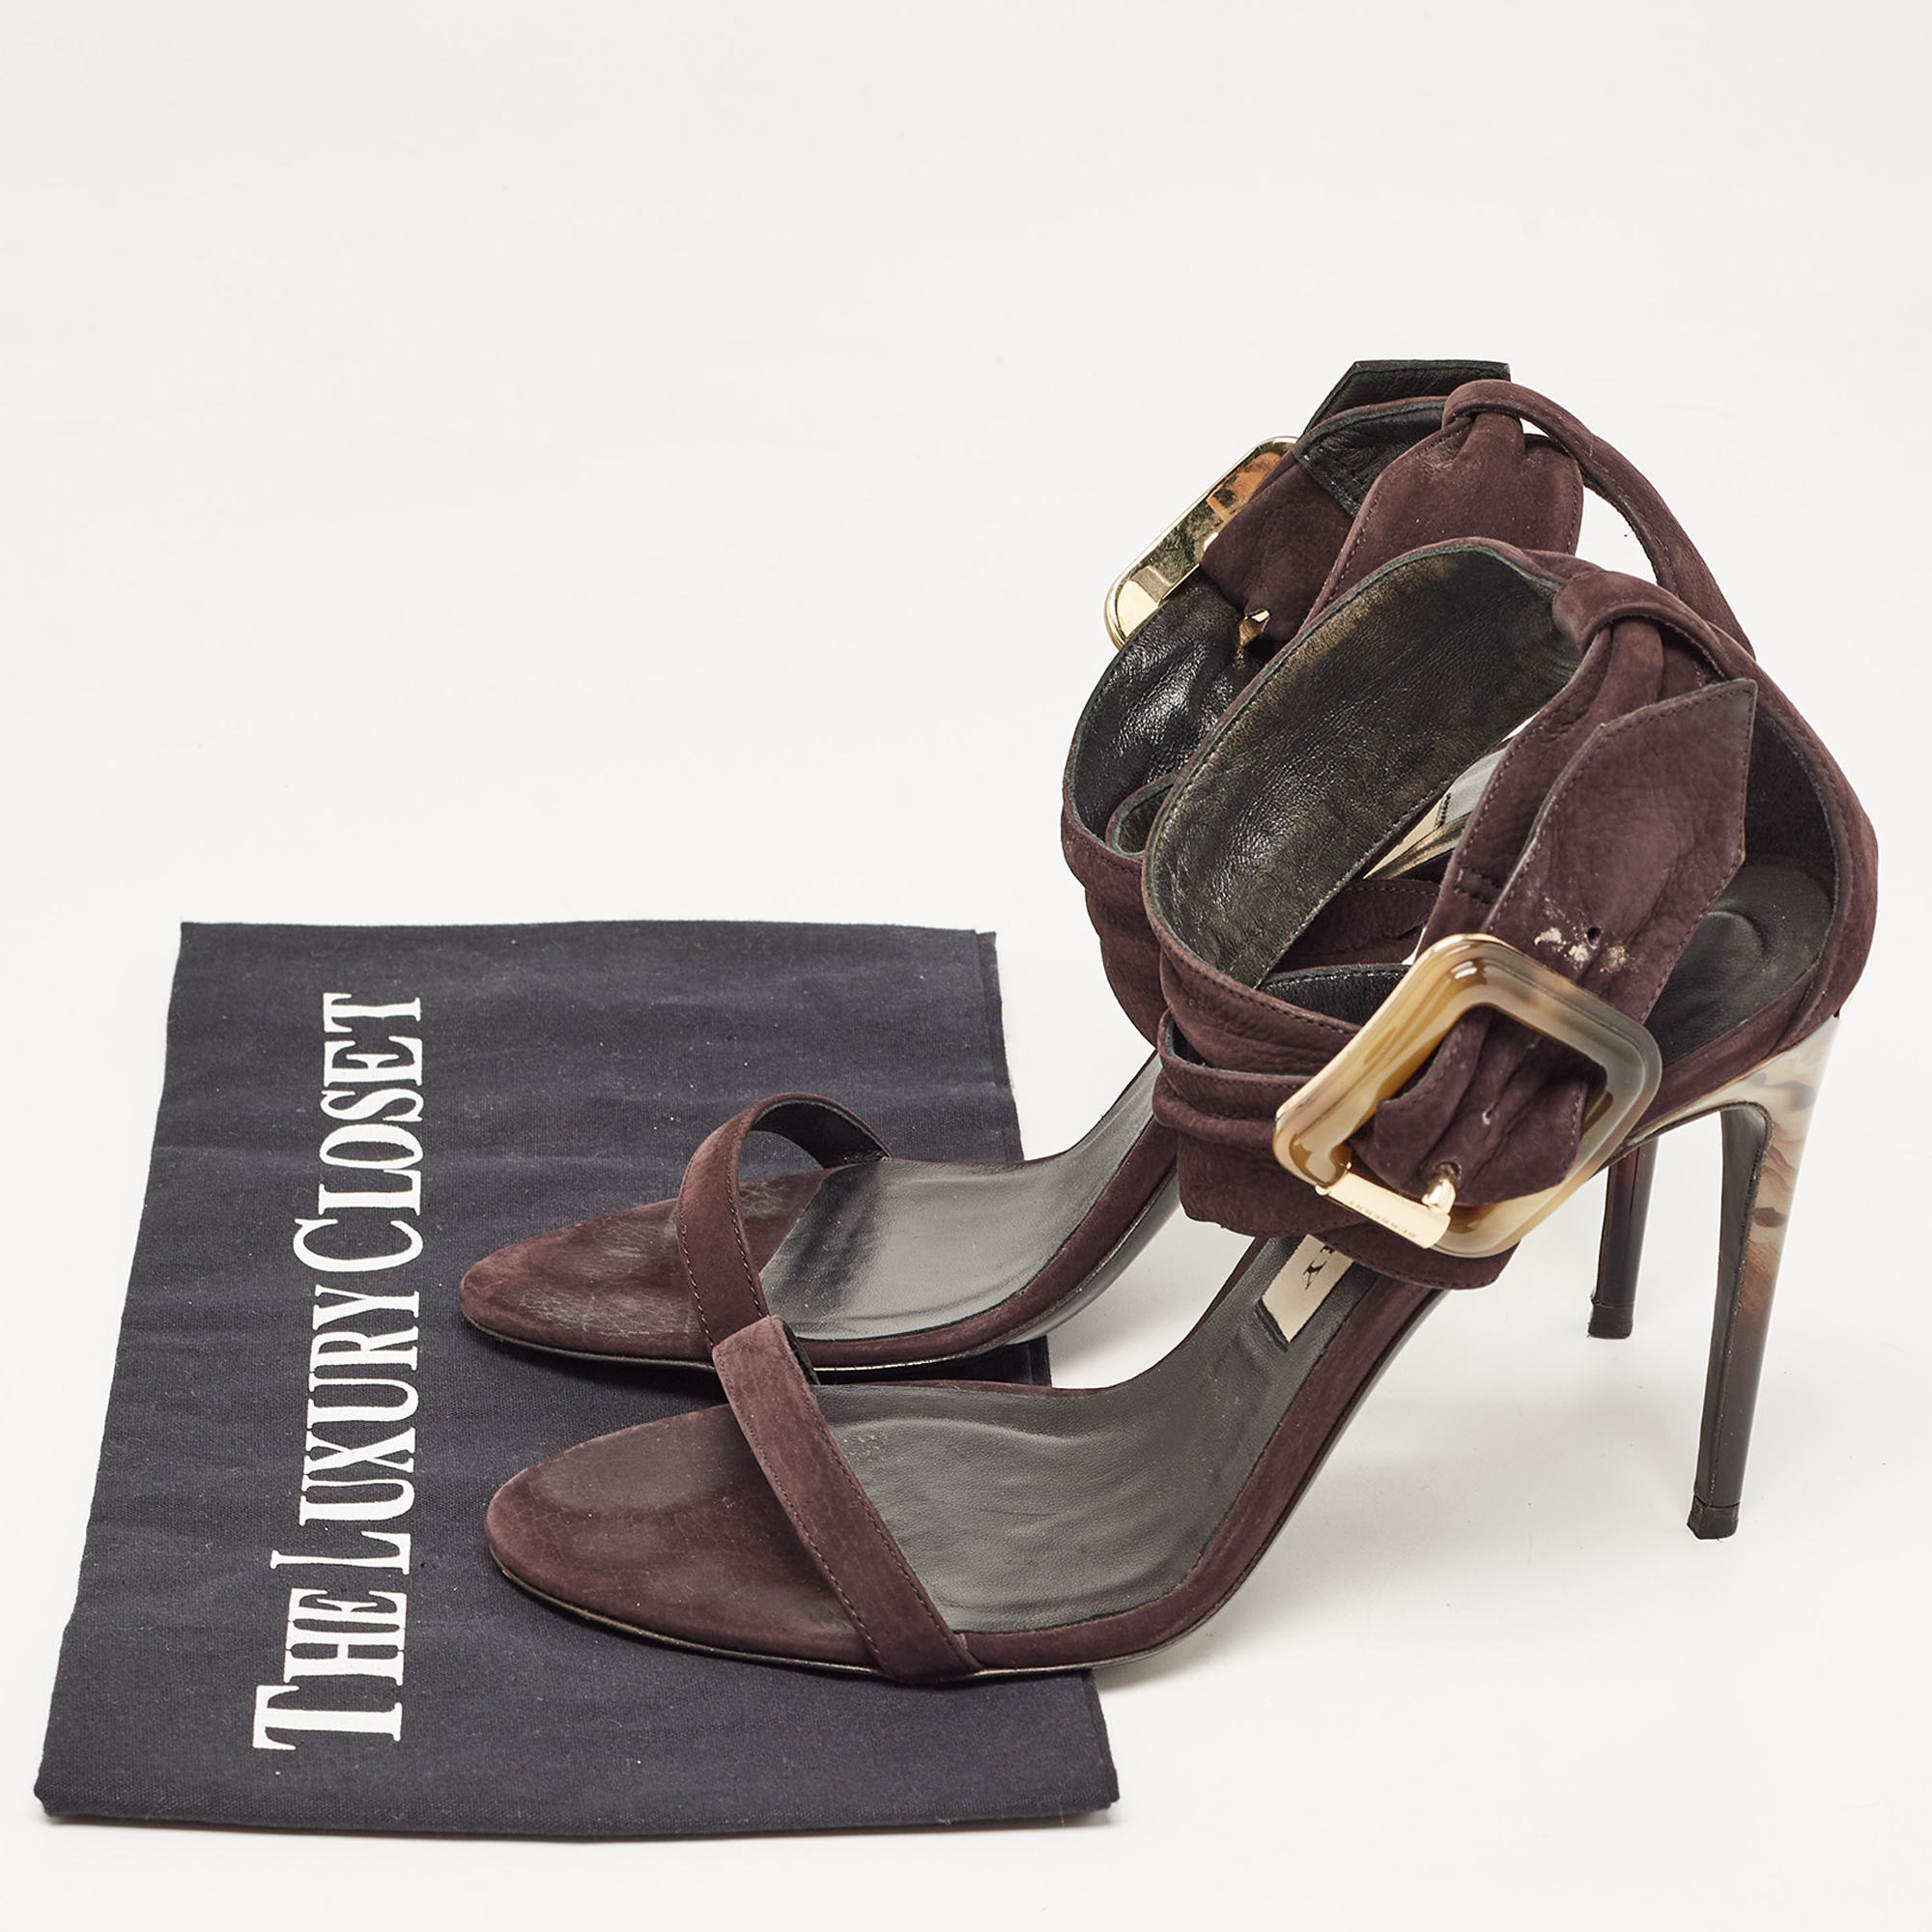 Burberry Purple Suede Buckle Ankle Wrap Sandals Size 37